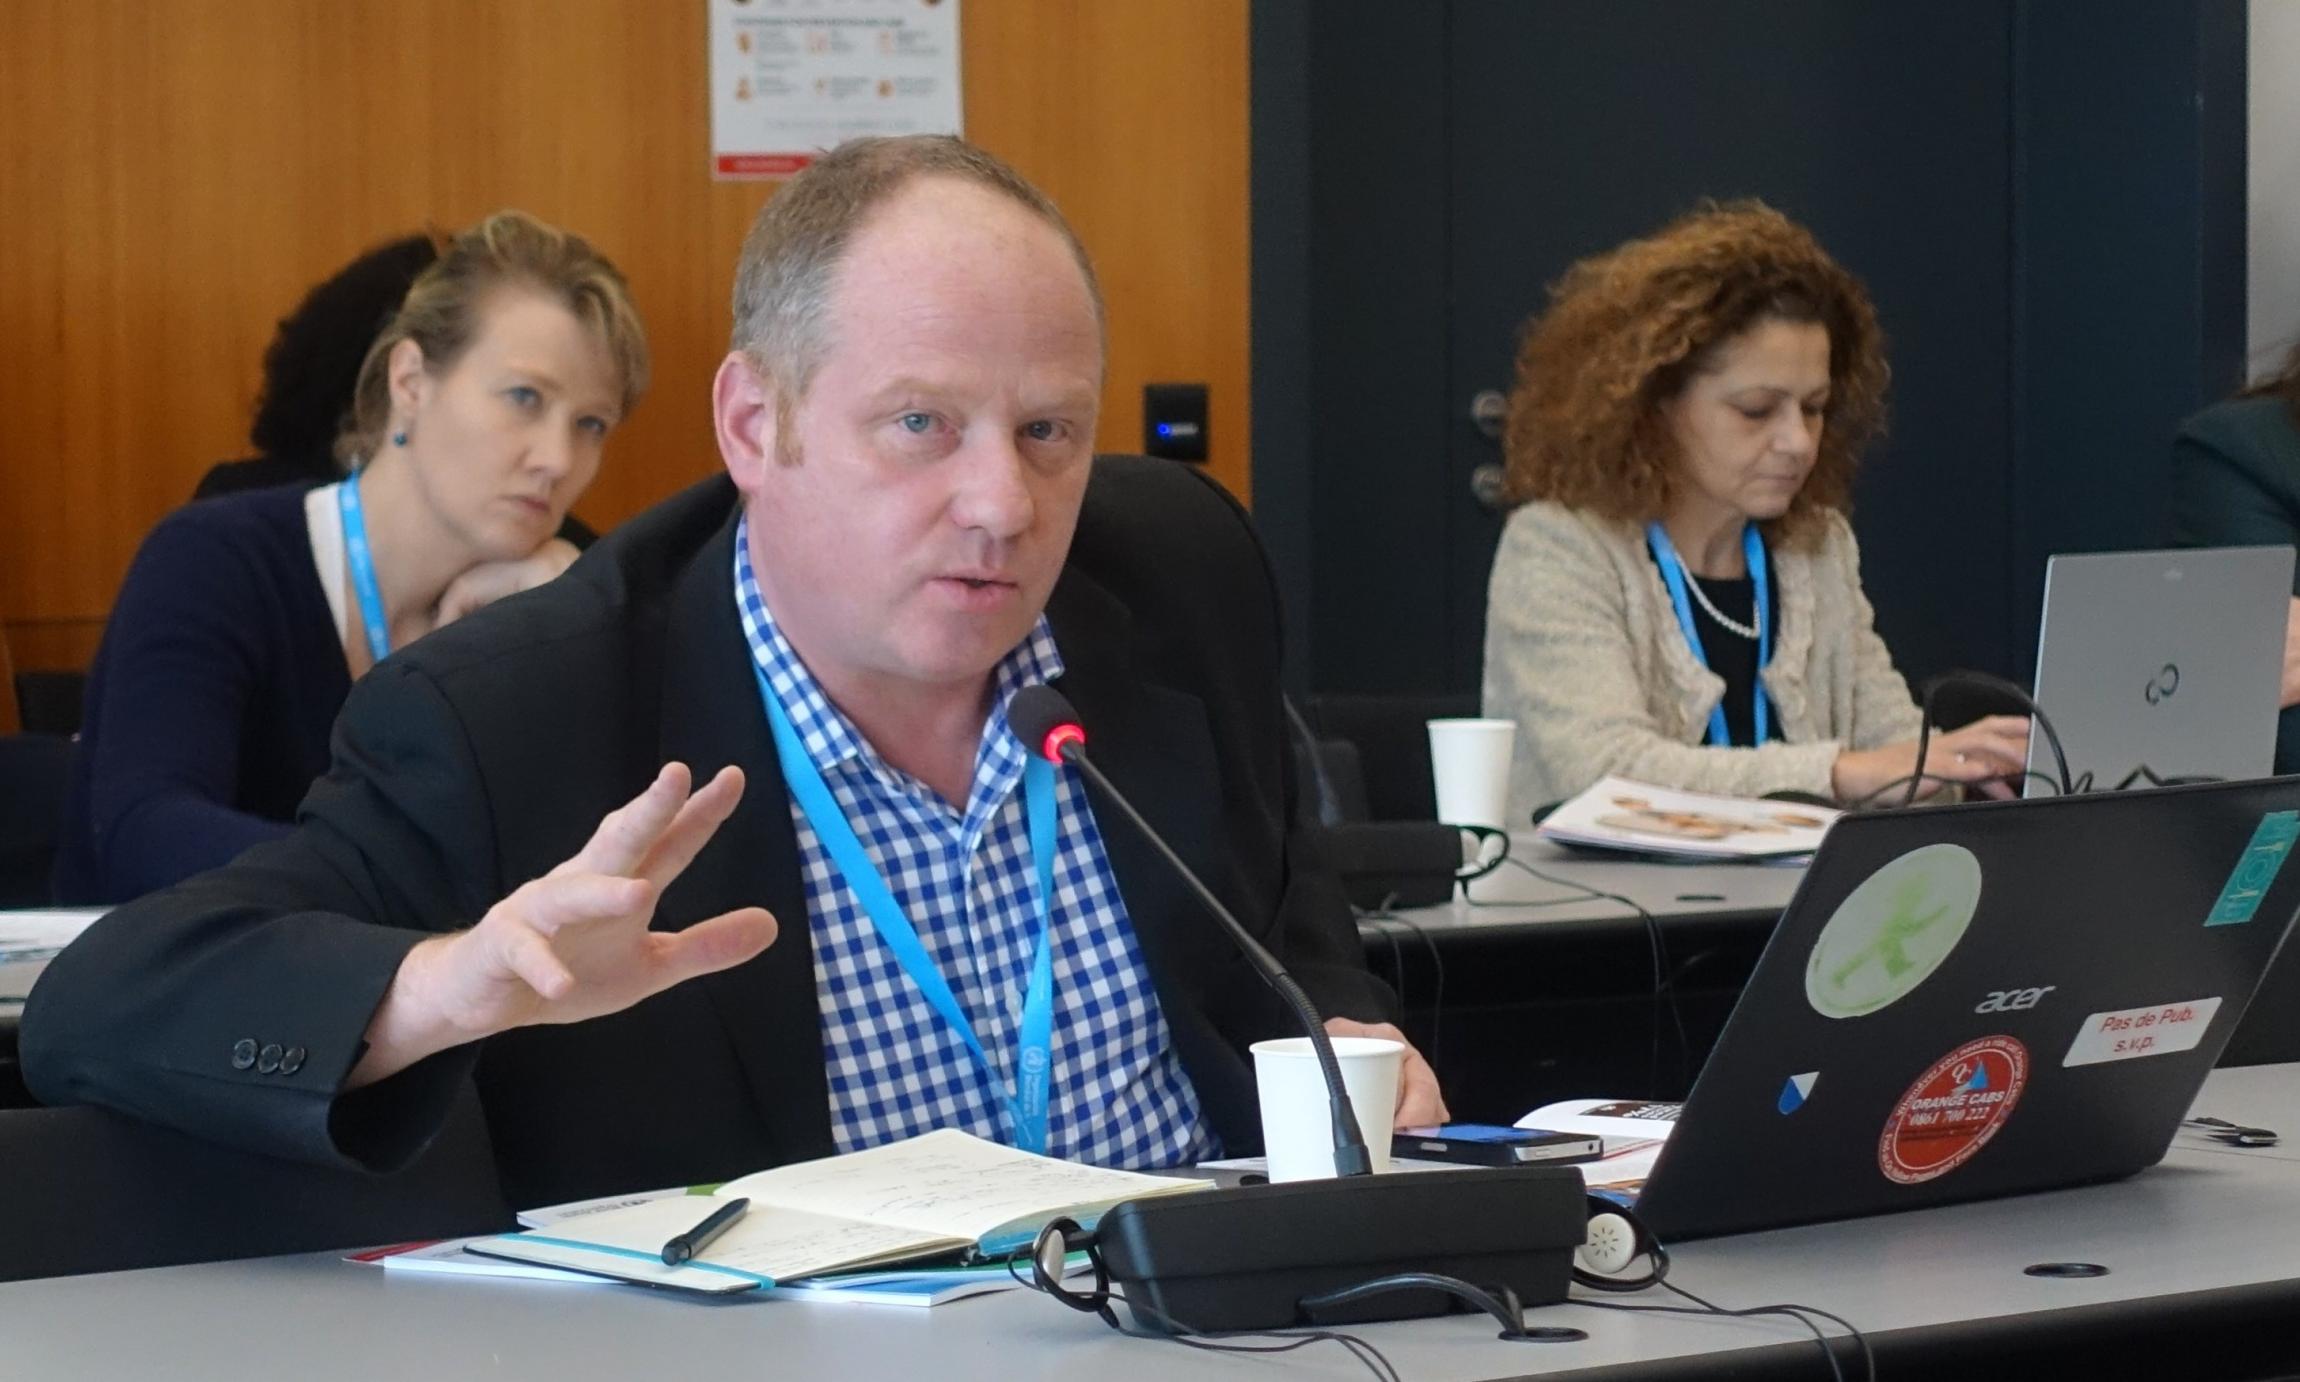 Steve Crump advocates for the need for deaf children to be safe at the World Health Organisation’s World Hearing Forum in Geneva.